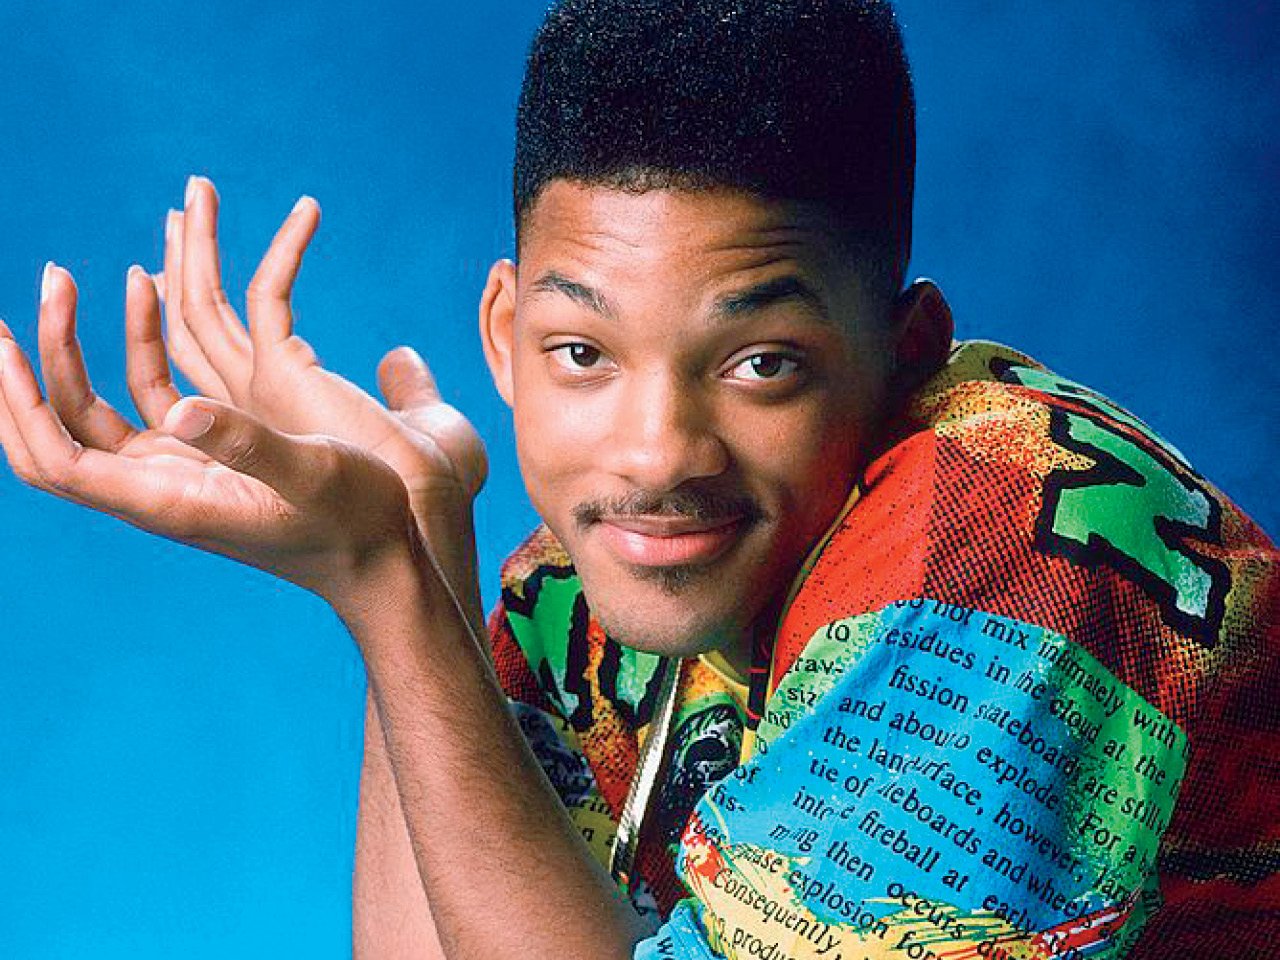 A photo of Will Smith from the Fresh Prince of Bel Air